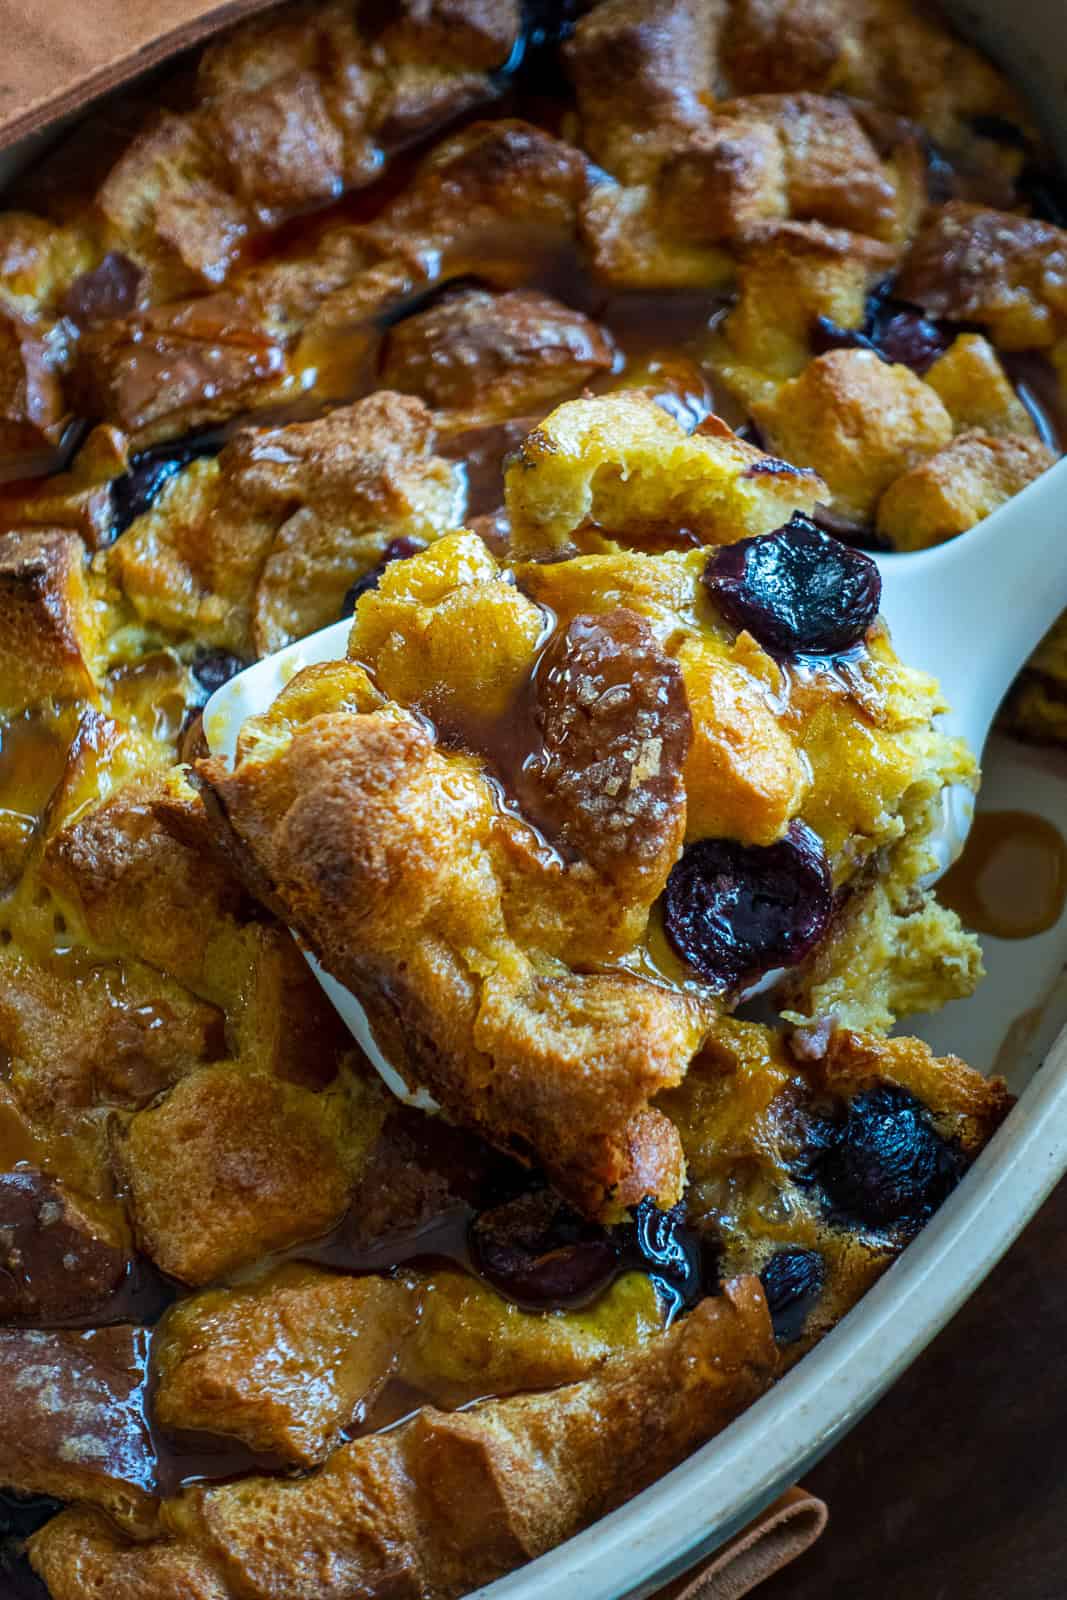 Traeger Smoked French Toast Casserole with Cherries and Maple Syrup 